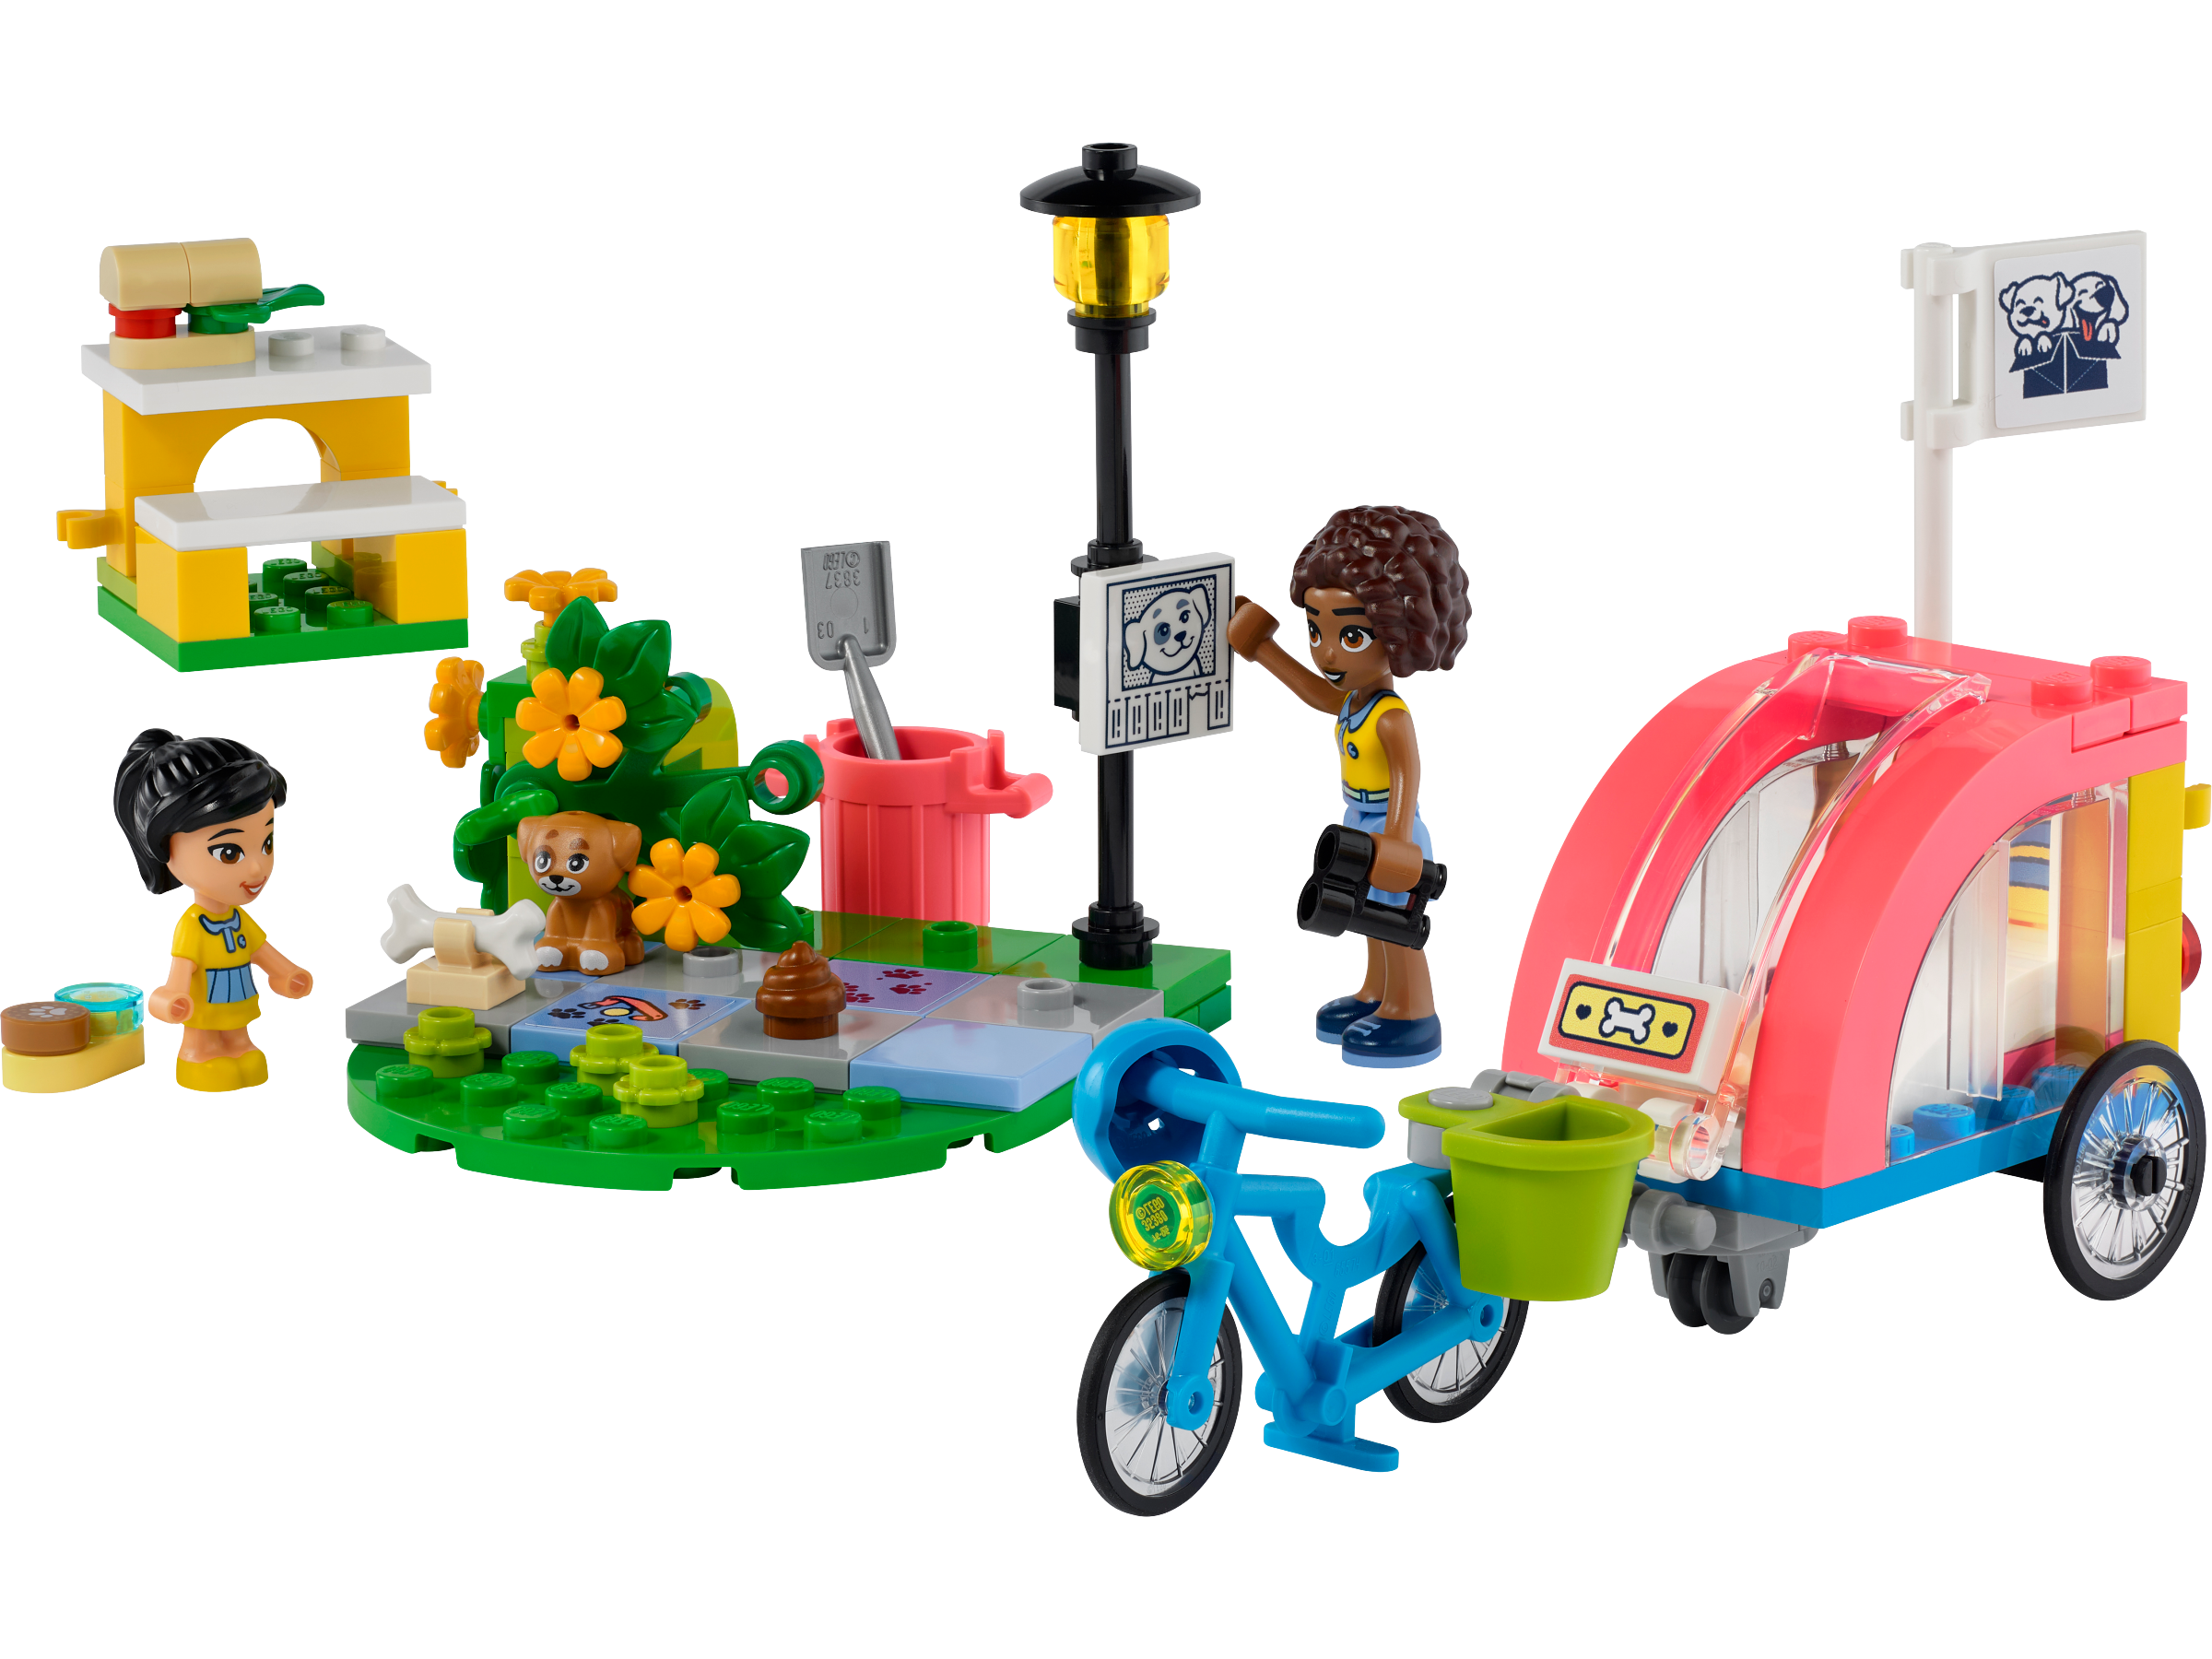 Rescue Bike 41738 | Friends Buy online at Official LEGO® US